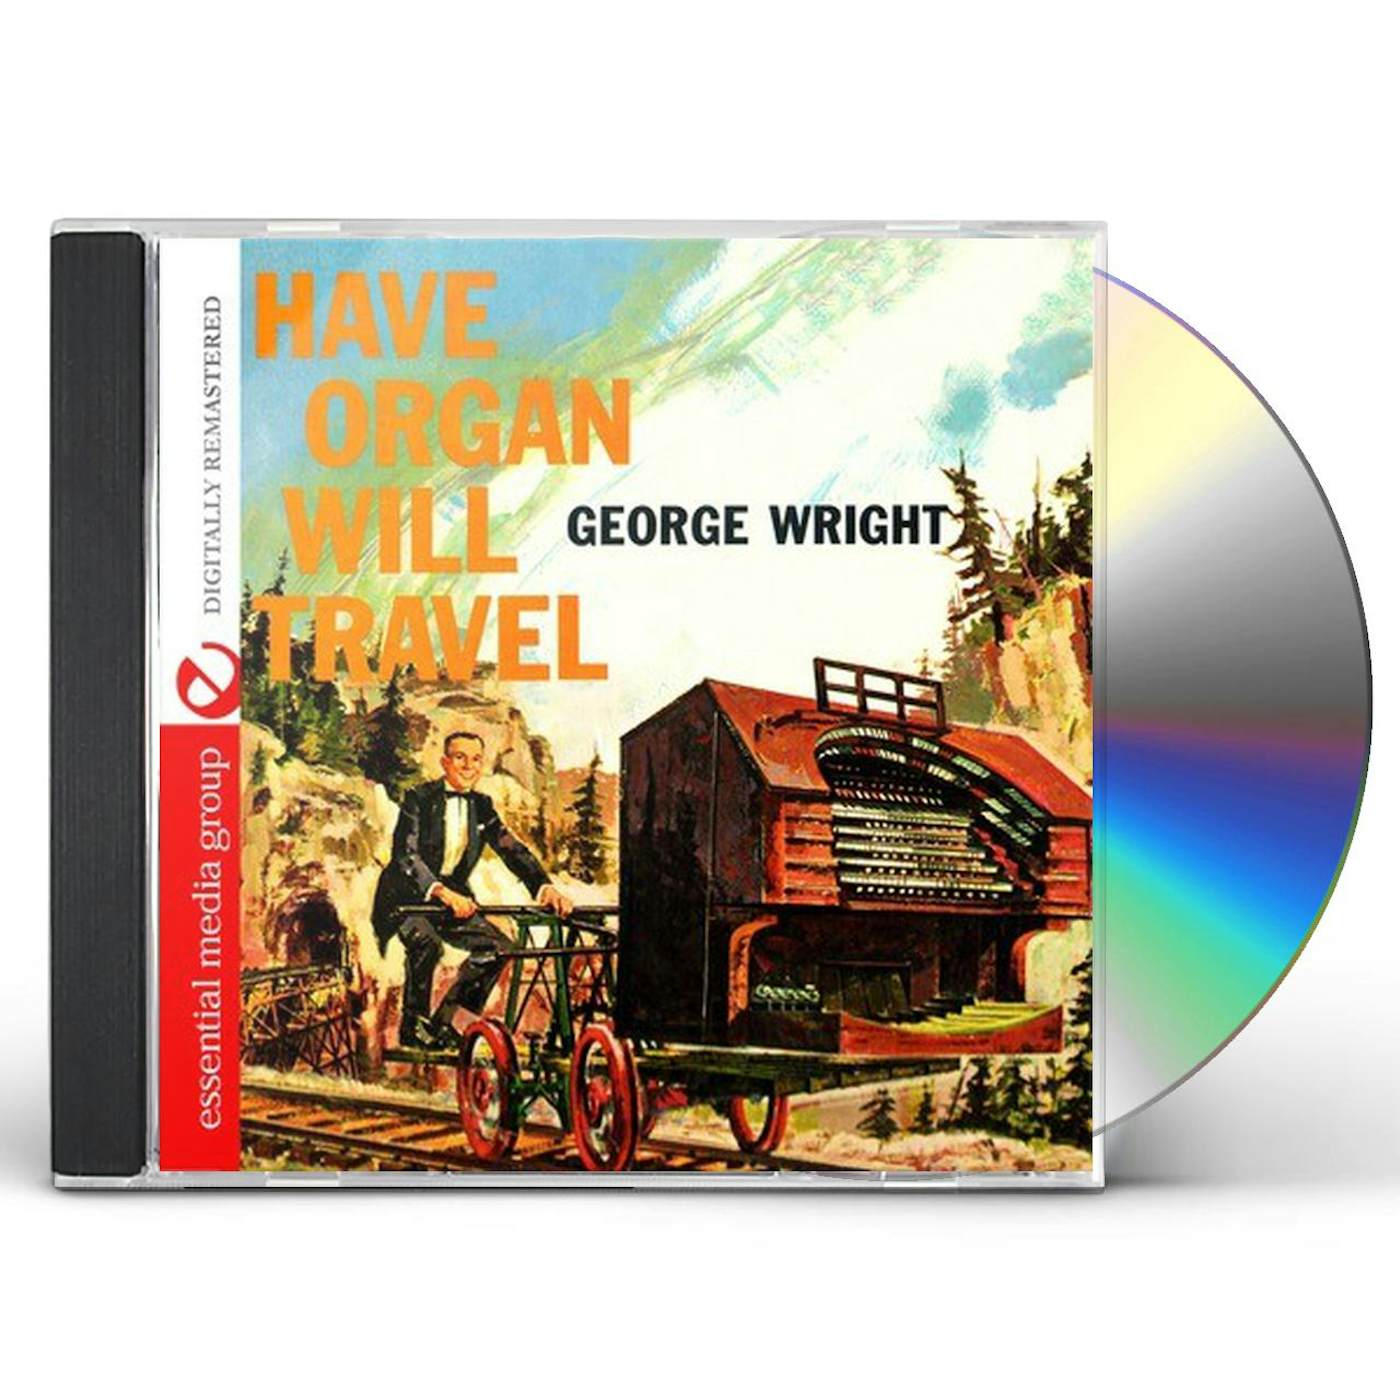 George Wright HAVE ORGAN WILL TRAVEL CD